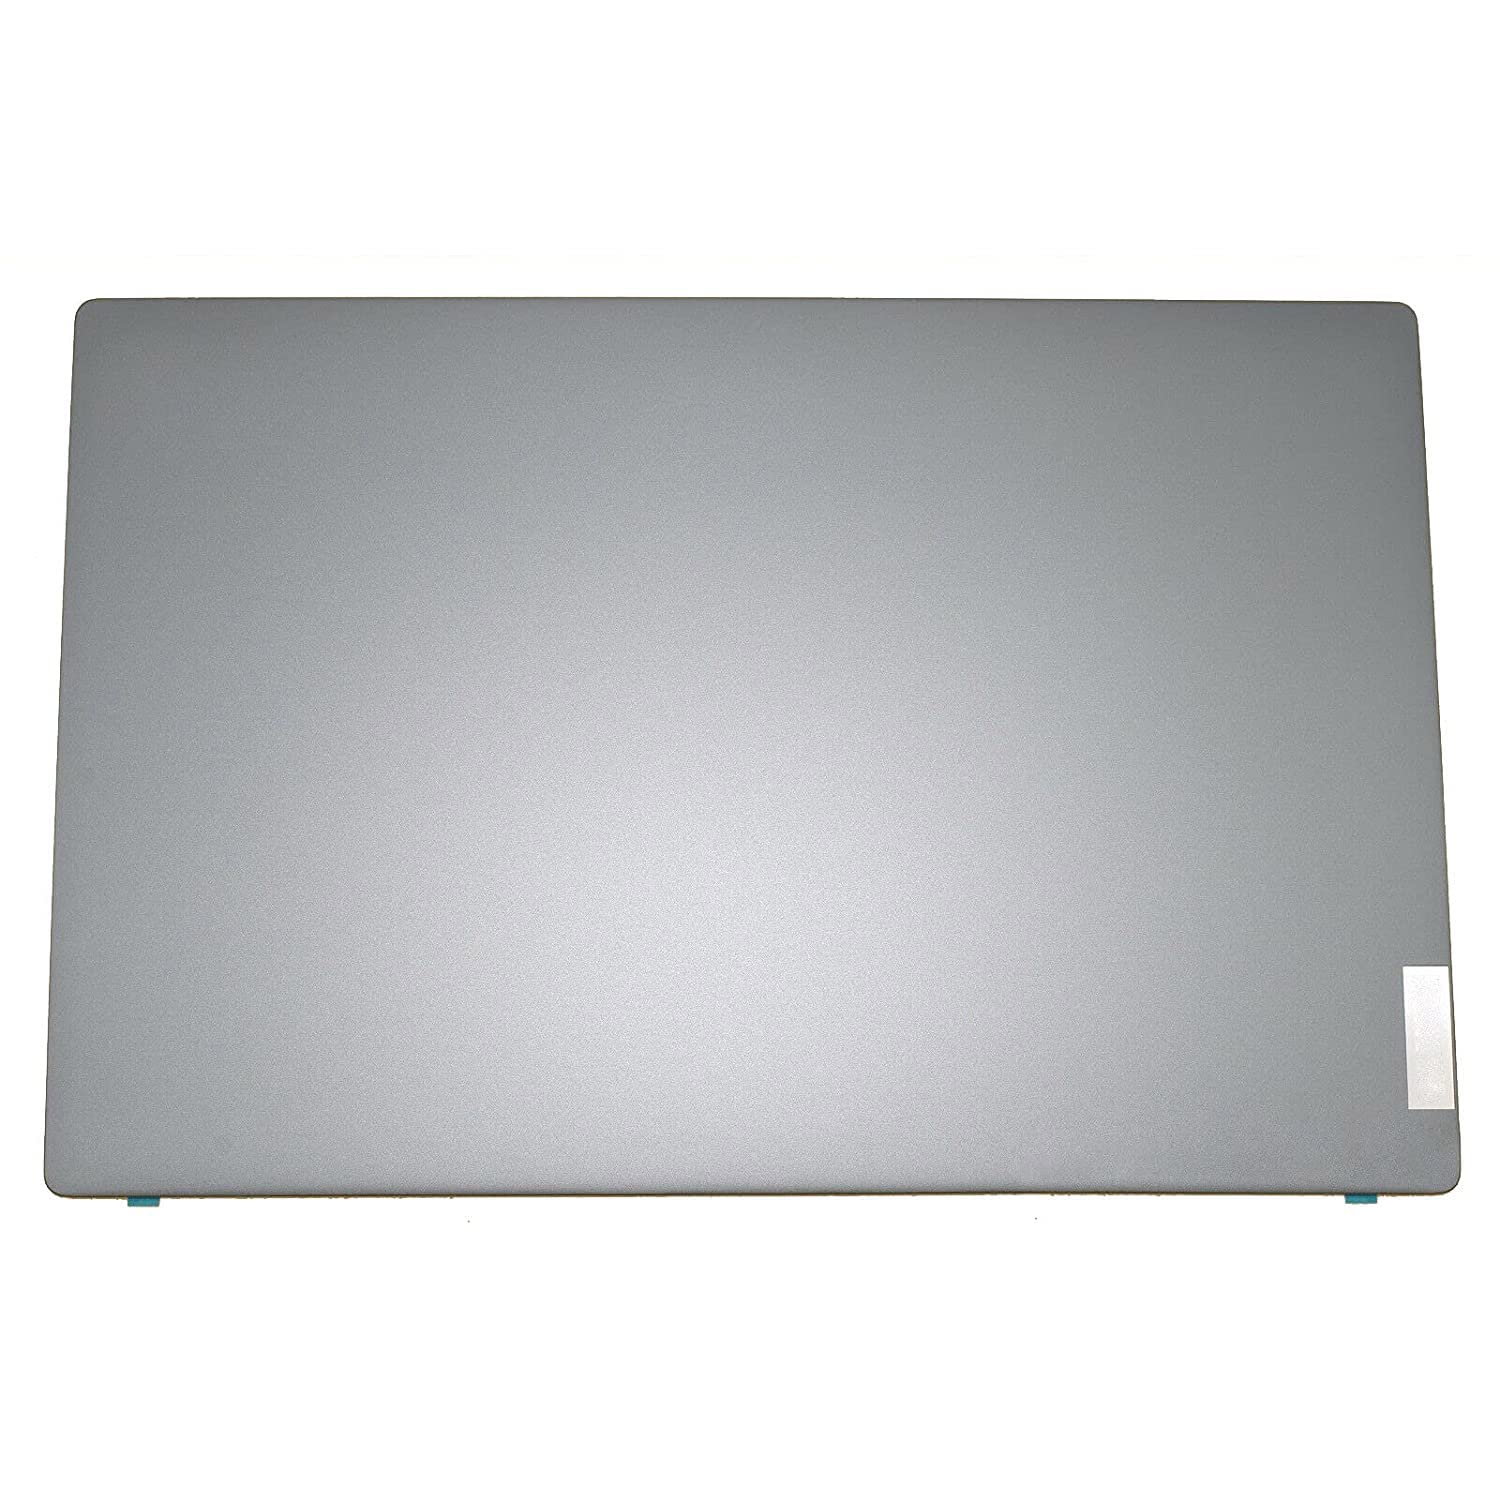 5CB0X56073 5B30S18941 New LCD Back Cover Rear Lid & Front Bezel for Lenovo Ideapad 5-15IIL05 81YK 5-15ARE05 81YQ 5-15ITL05 82FG AM1K7000310 AM1K7000110